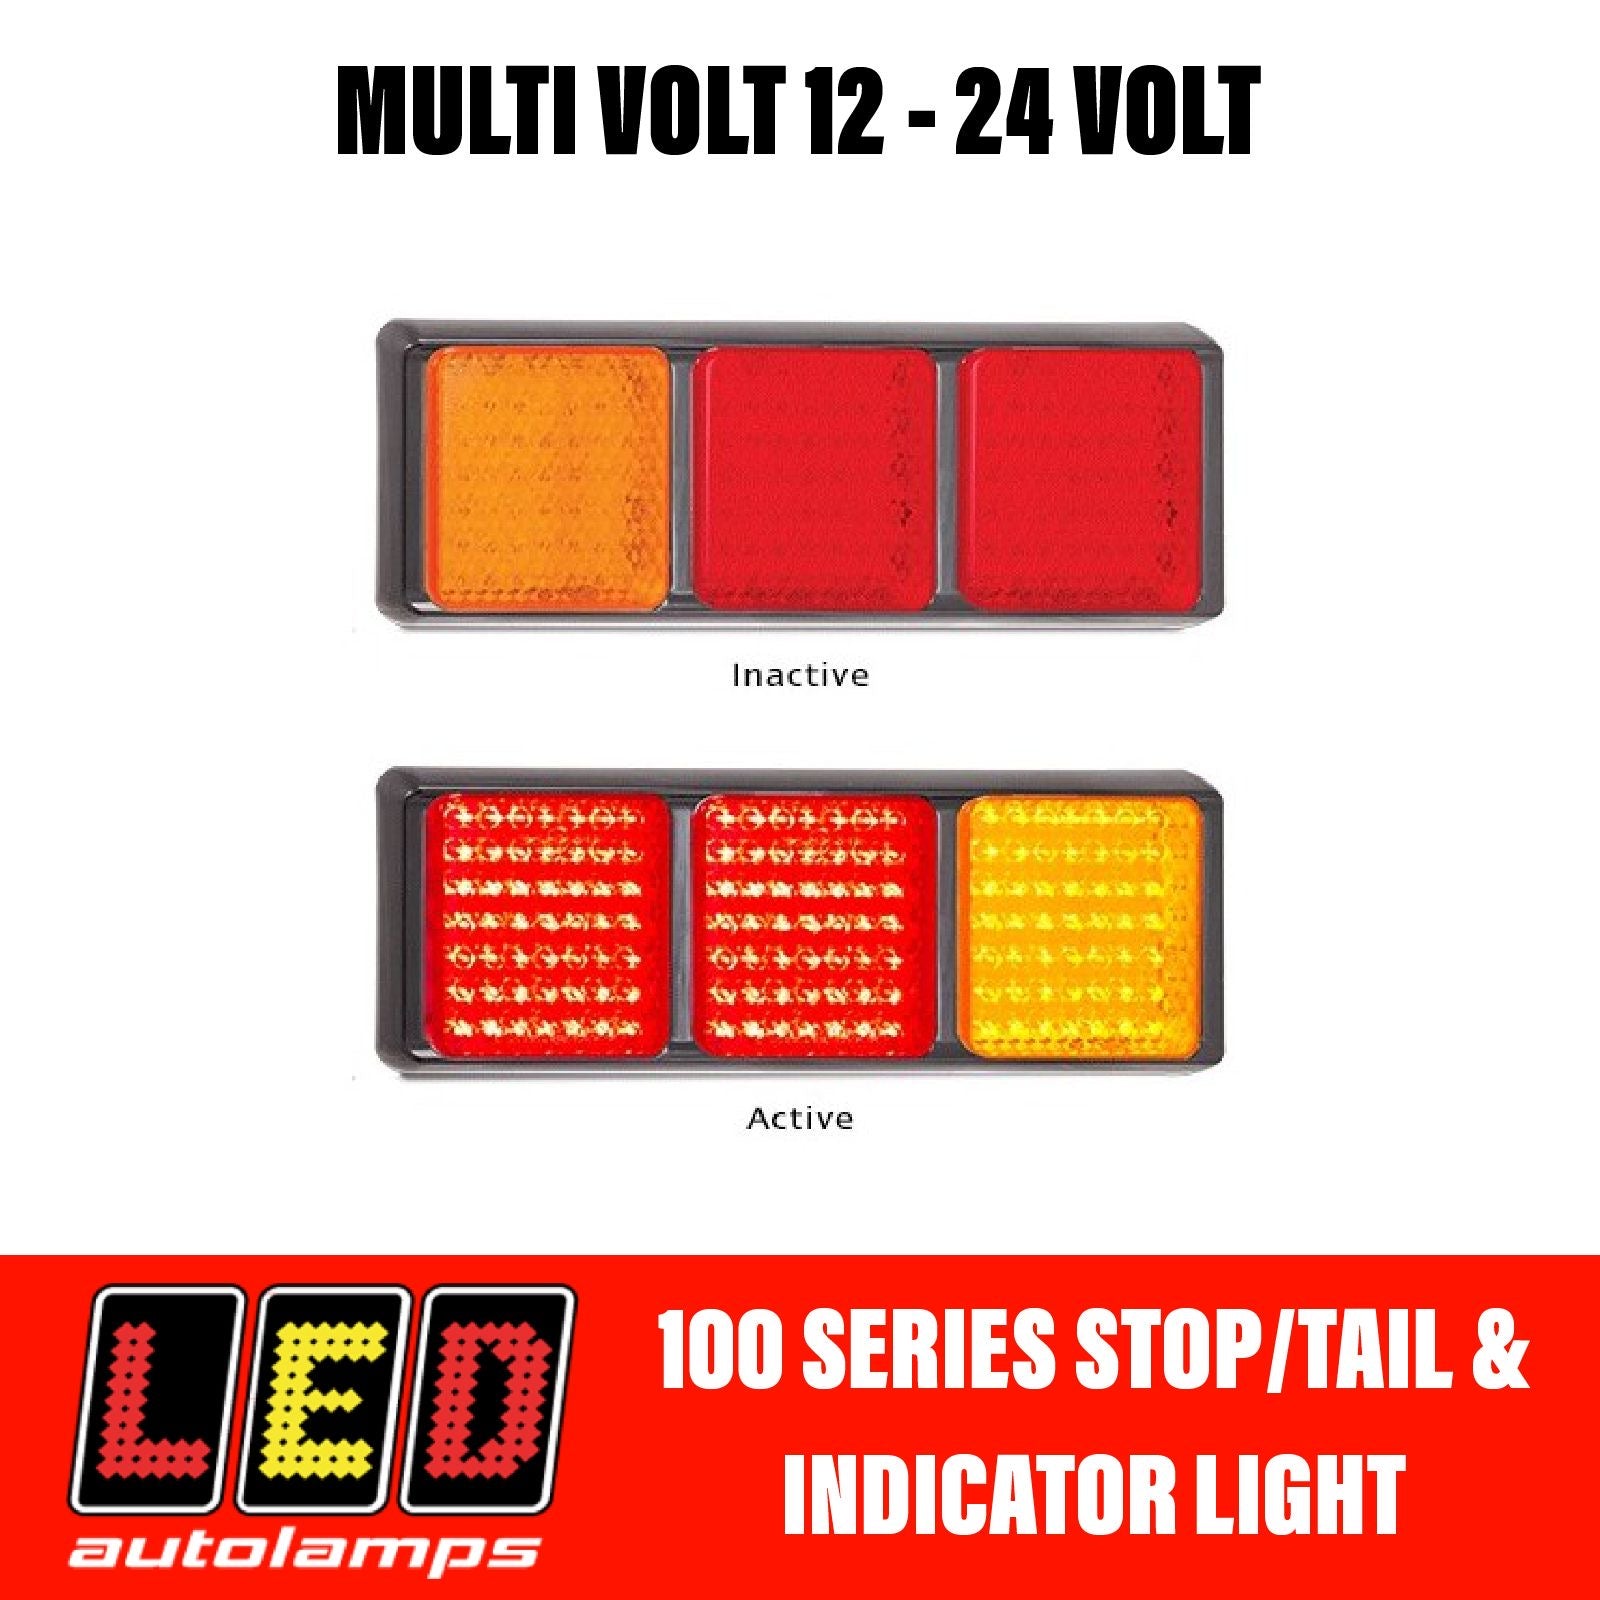 LED Autolamps 100 Series Stop/Tail and Indicator LED Light 5 Year Warranty